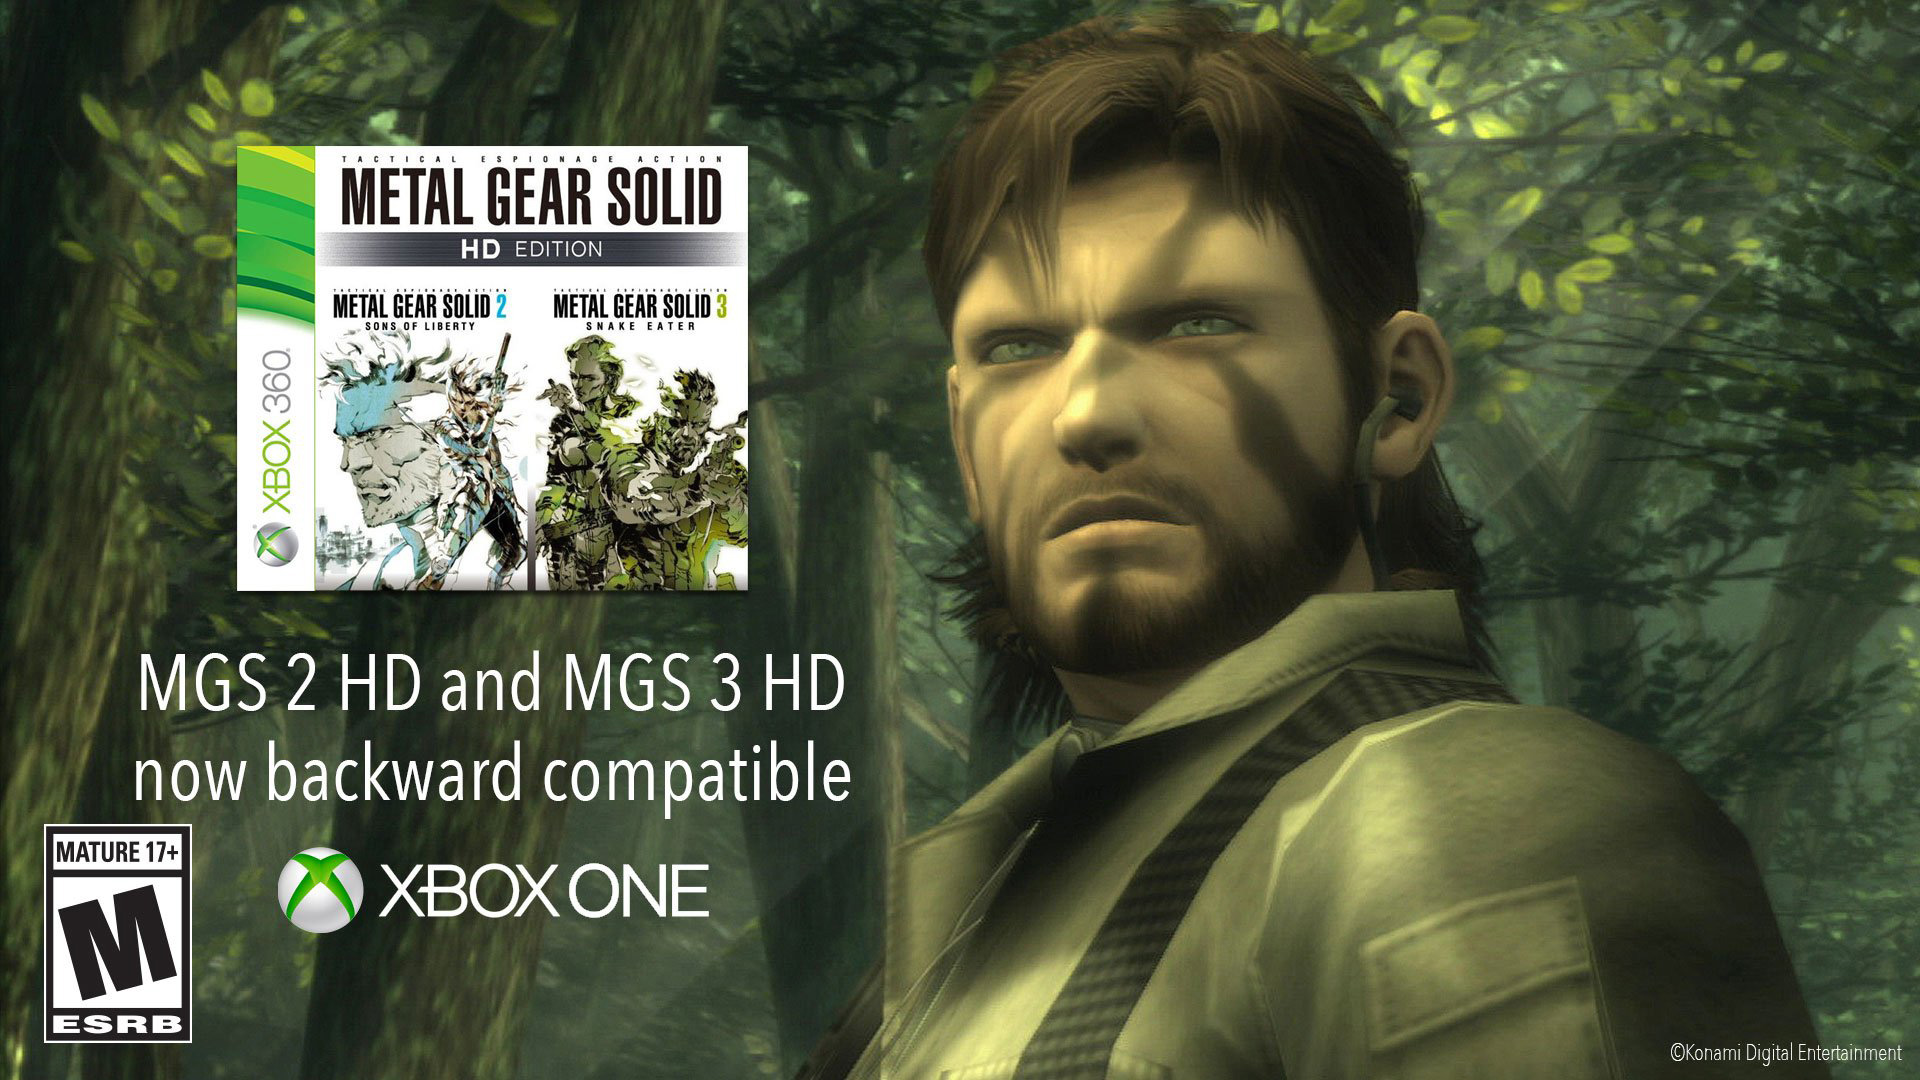 geluid medeleerling labyrint Metal Gear Solid 2 and Metal Gear Solid 3 HD available on Xbox One Backward  Compatibility